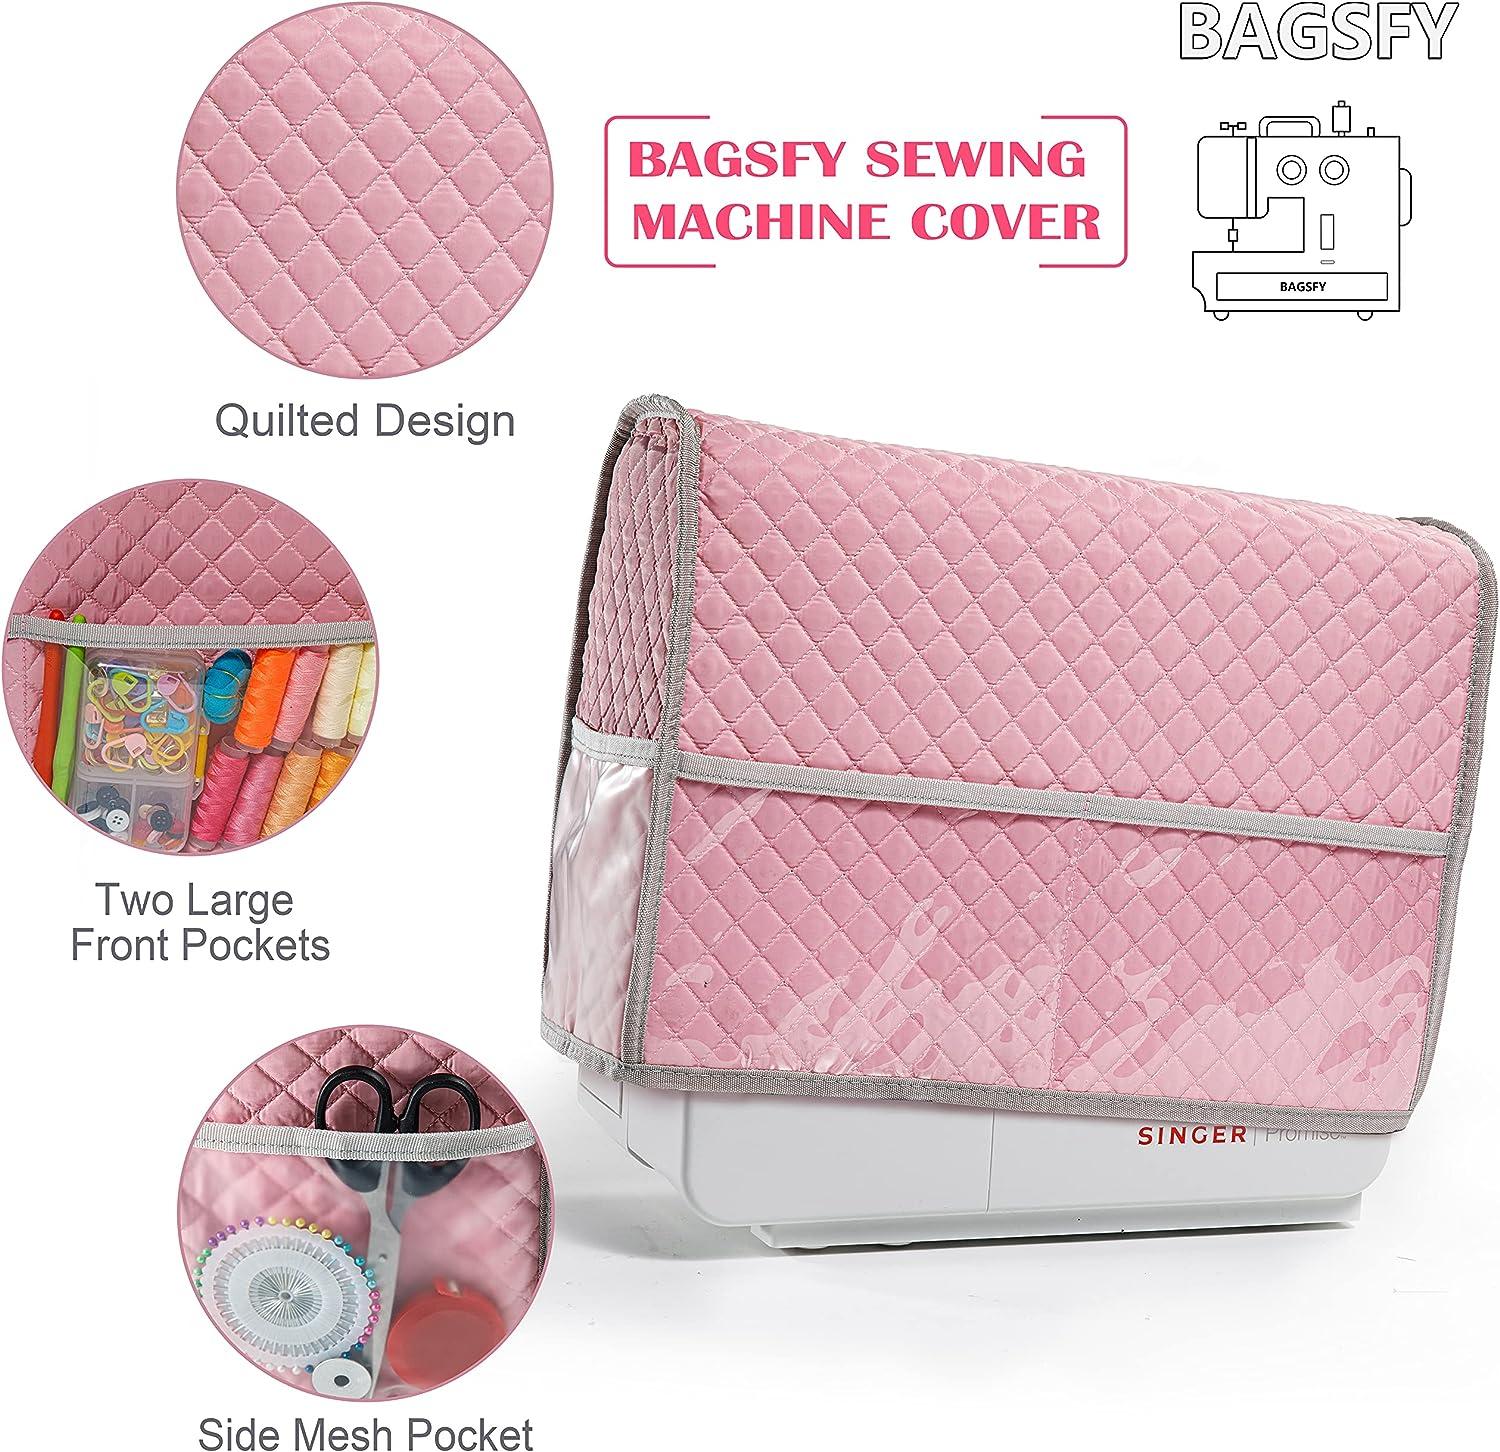 BAGSFY Sewing Machine Cover with Storage Pockets, Pink Sewing Machine Dust  Cover Compatible with Most Standard Singer & Brother Sewing Machine